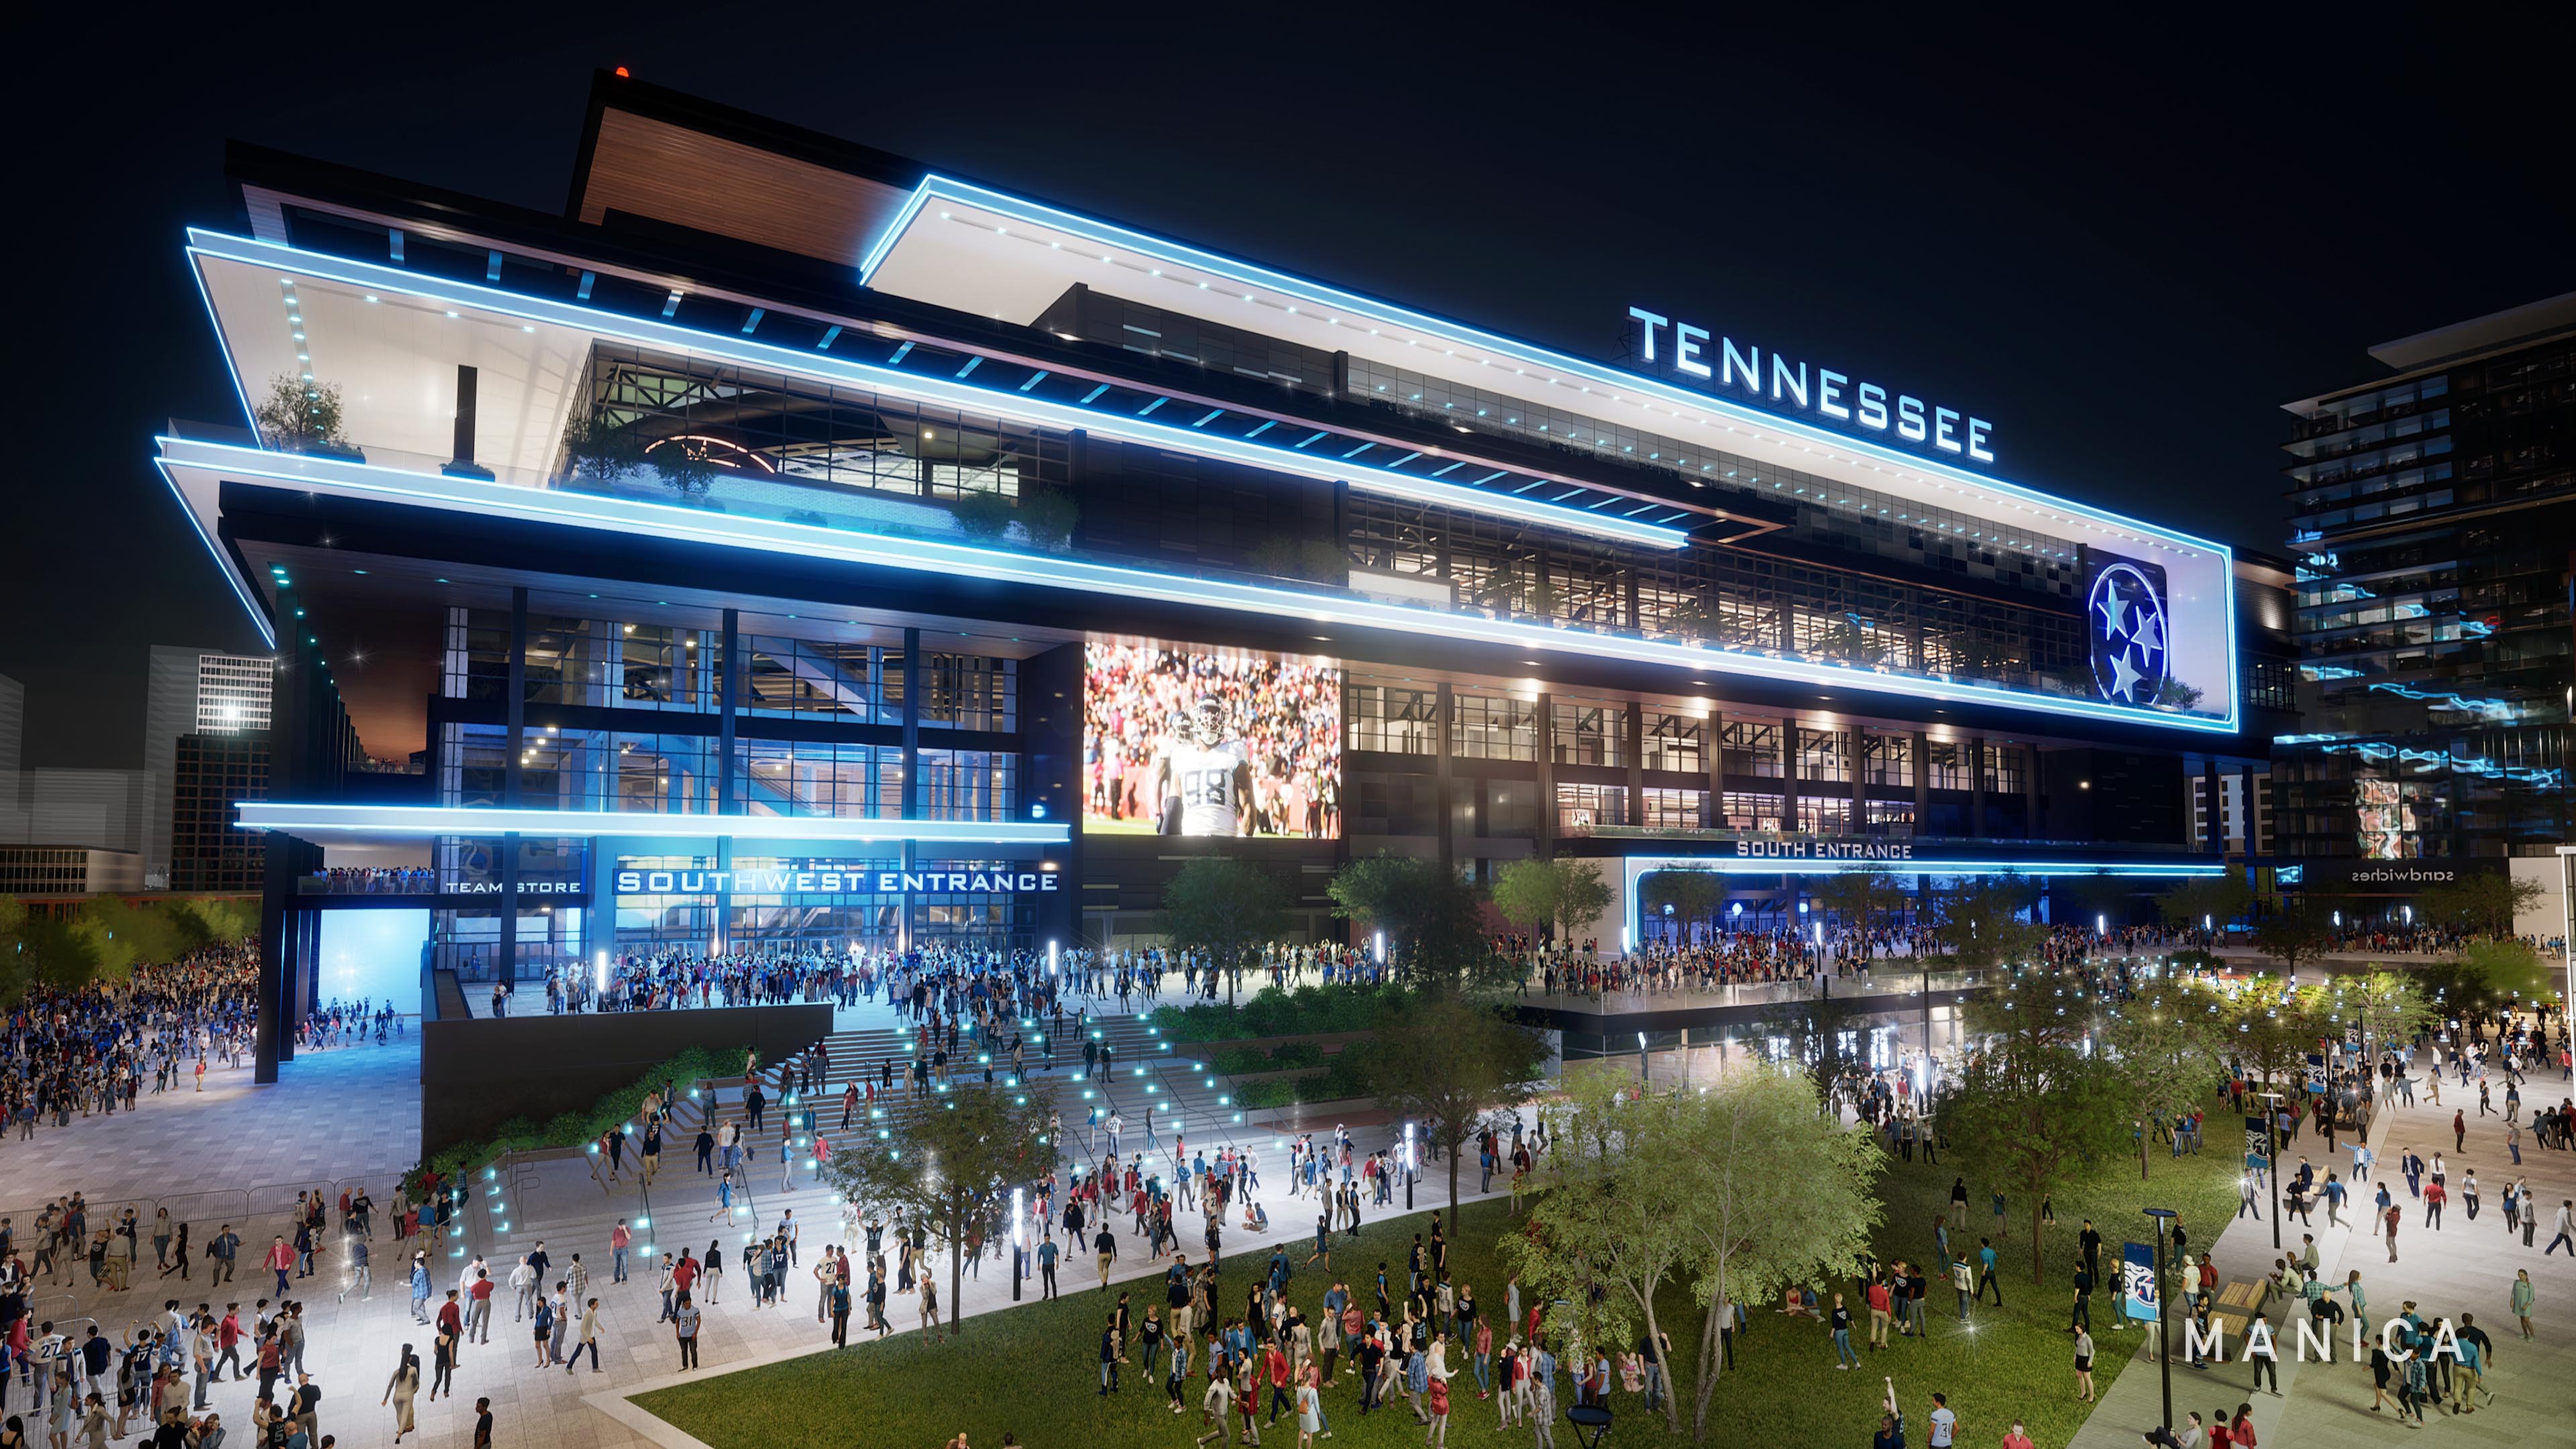 New Tennessee Titans stadium conceived to maximize types of events that can be hosted